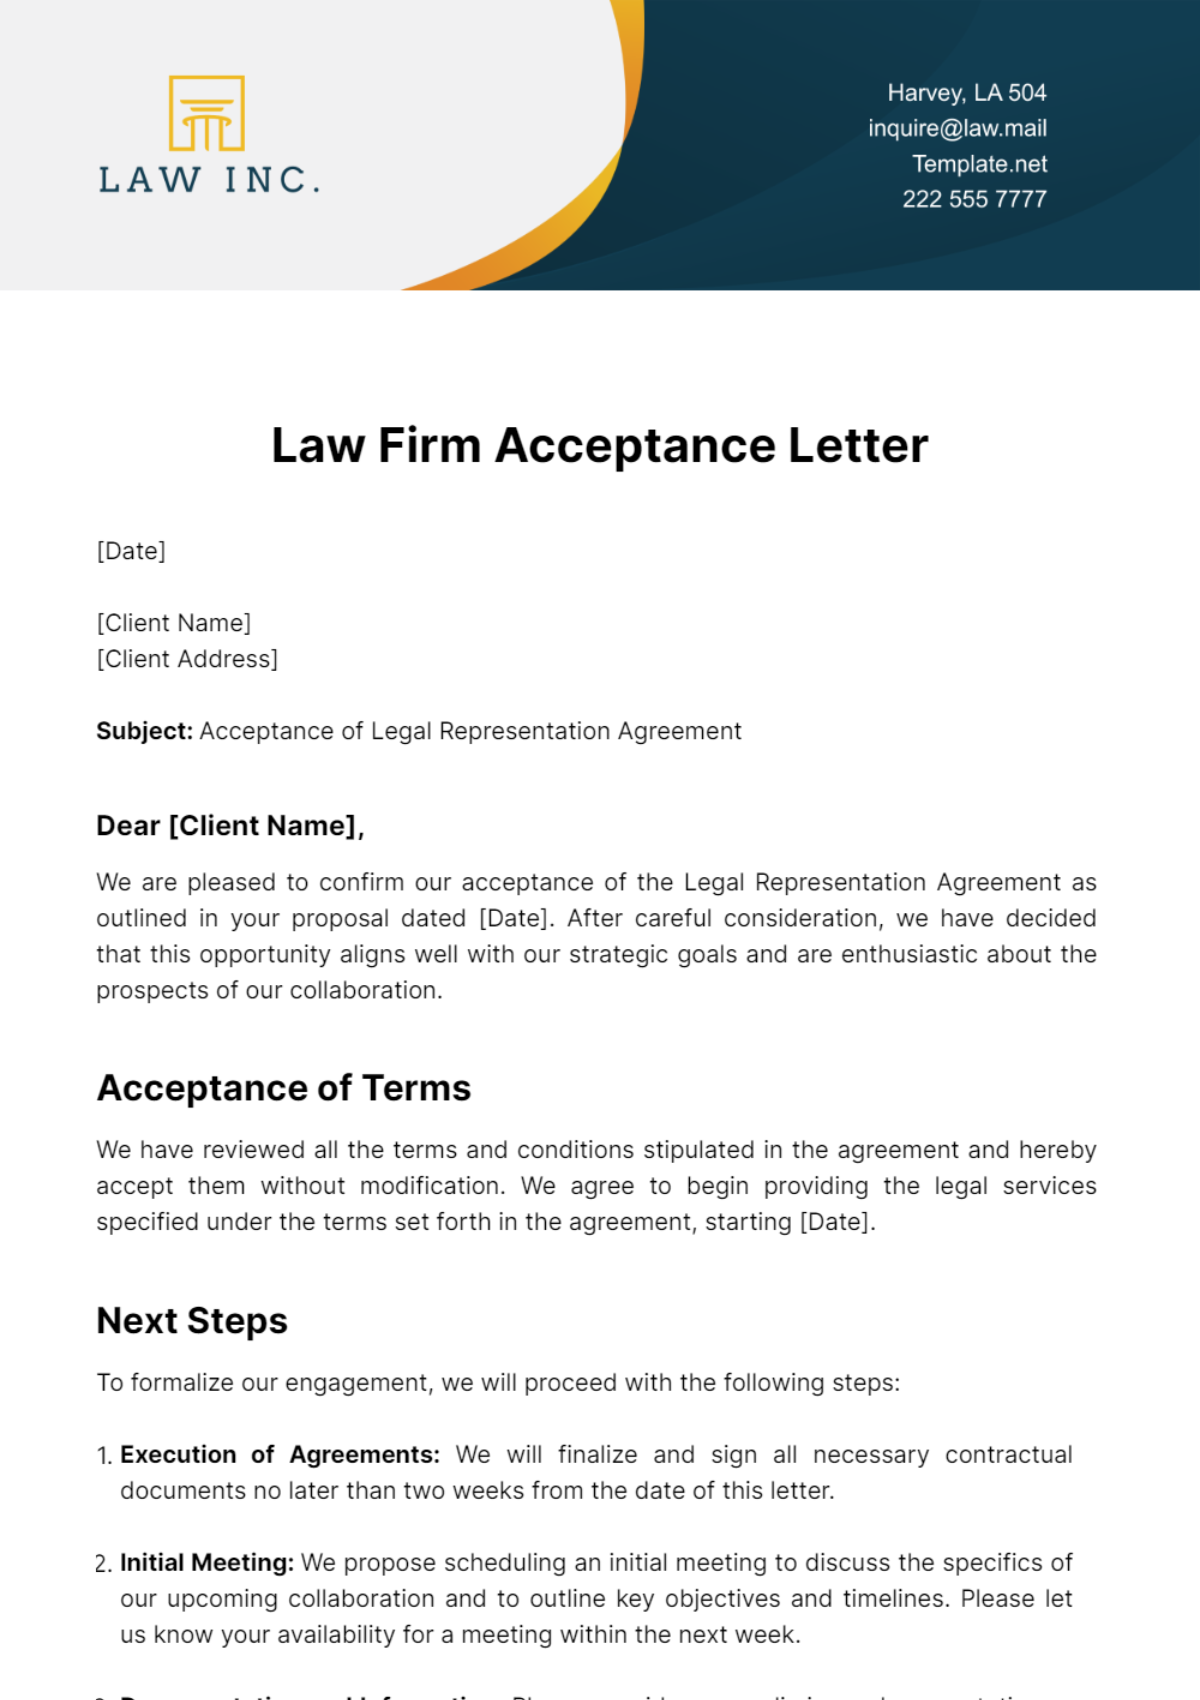 Free Law Firm Acceptance Letter Template